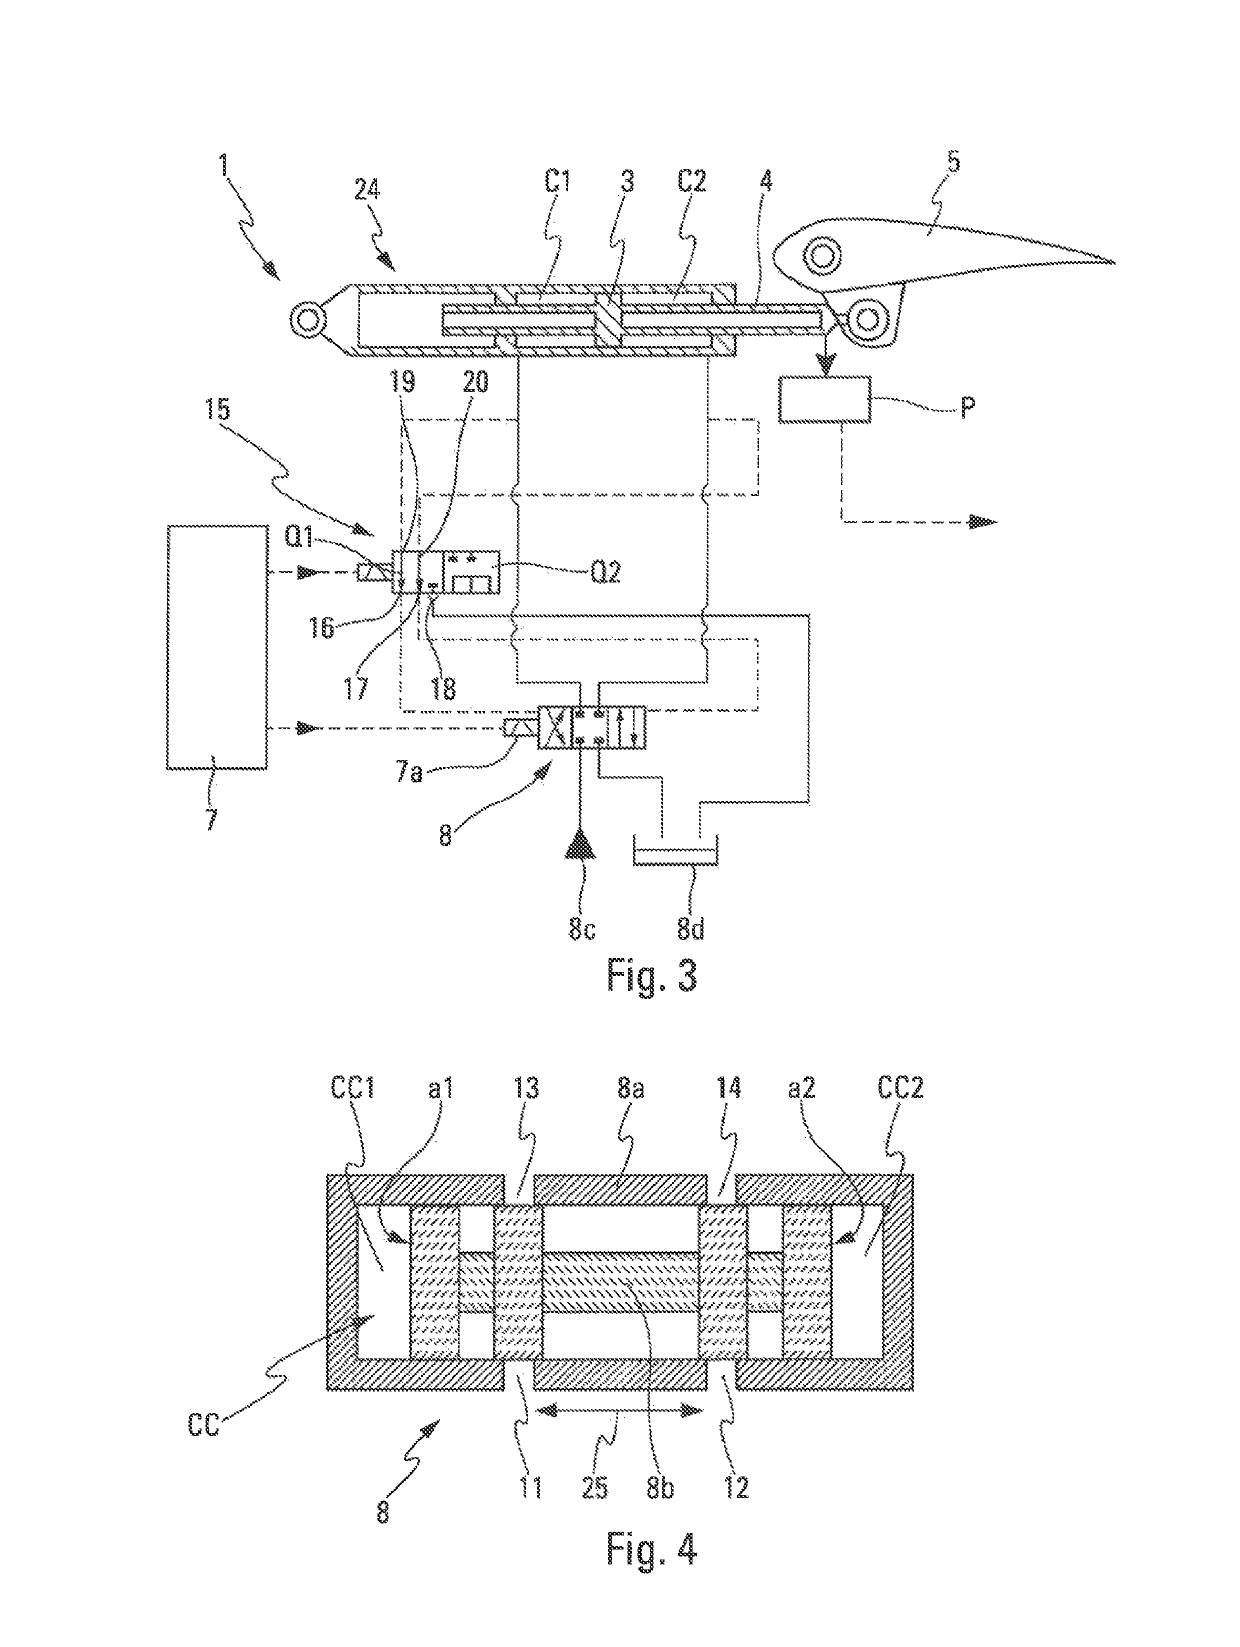 System for actuating a control surface of an aircraft